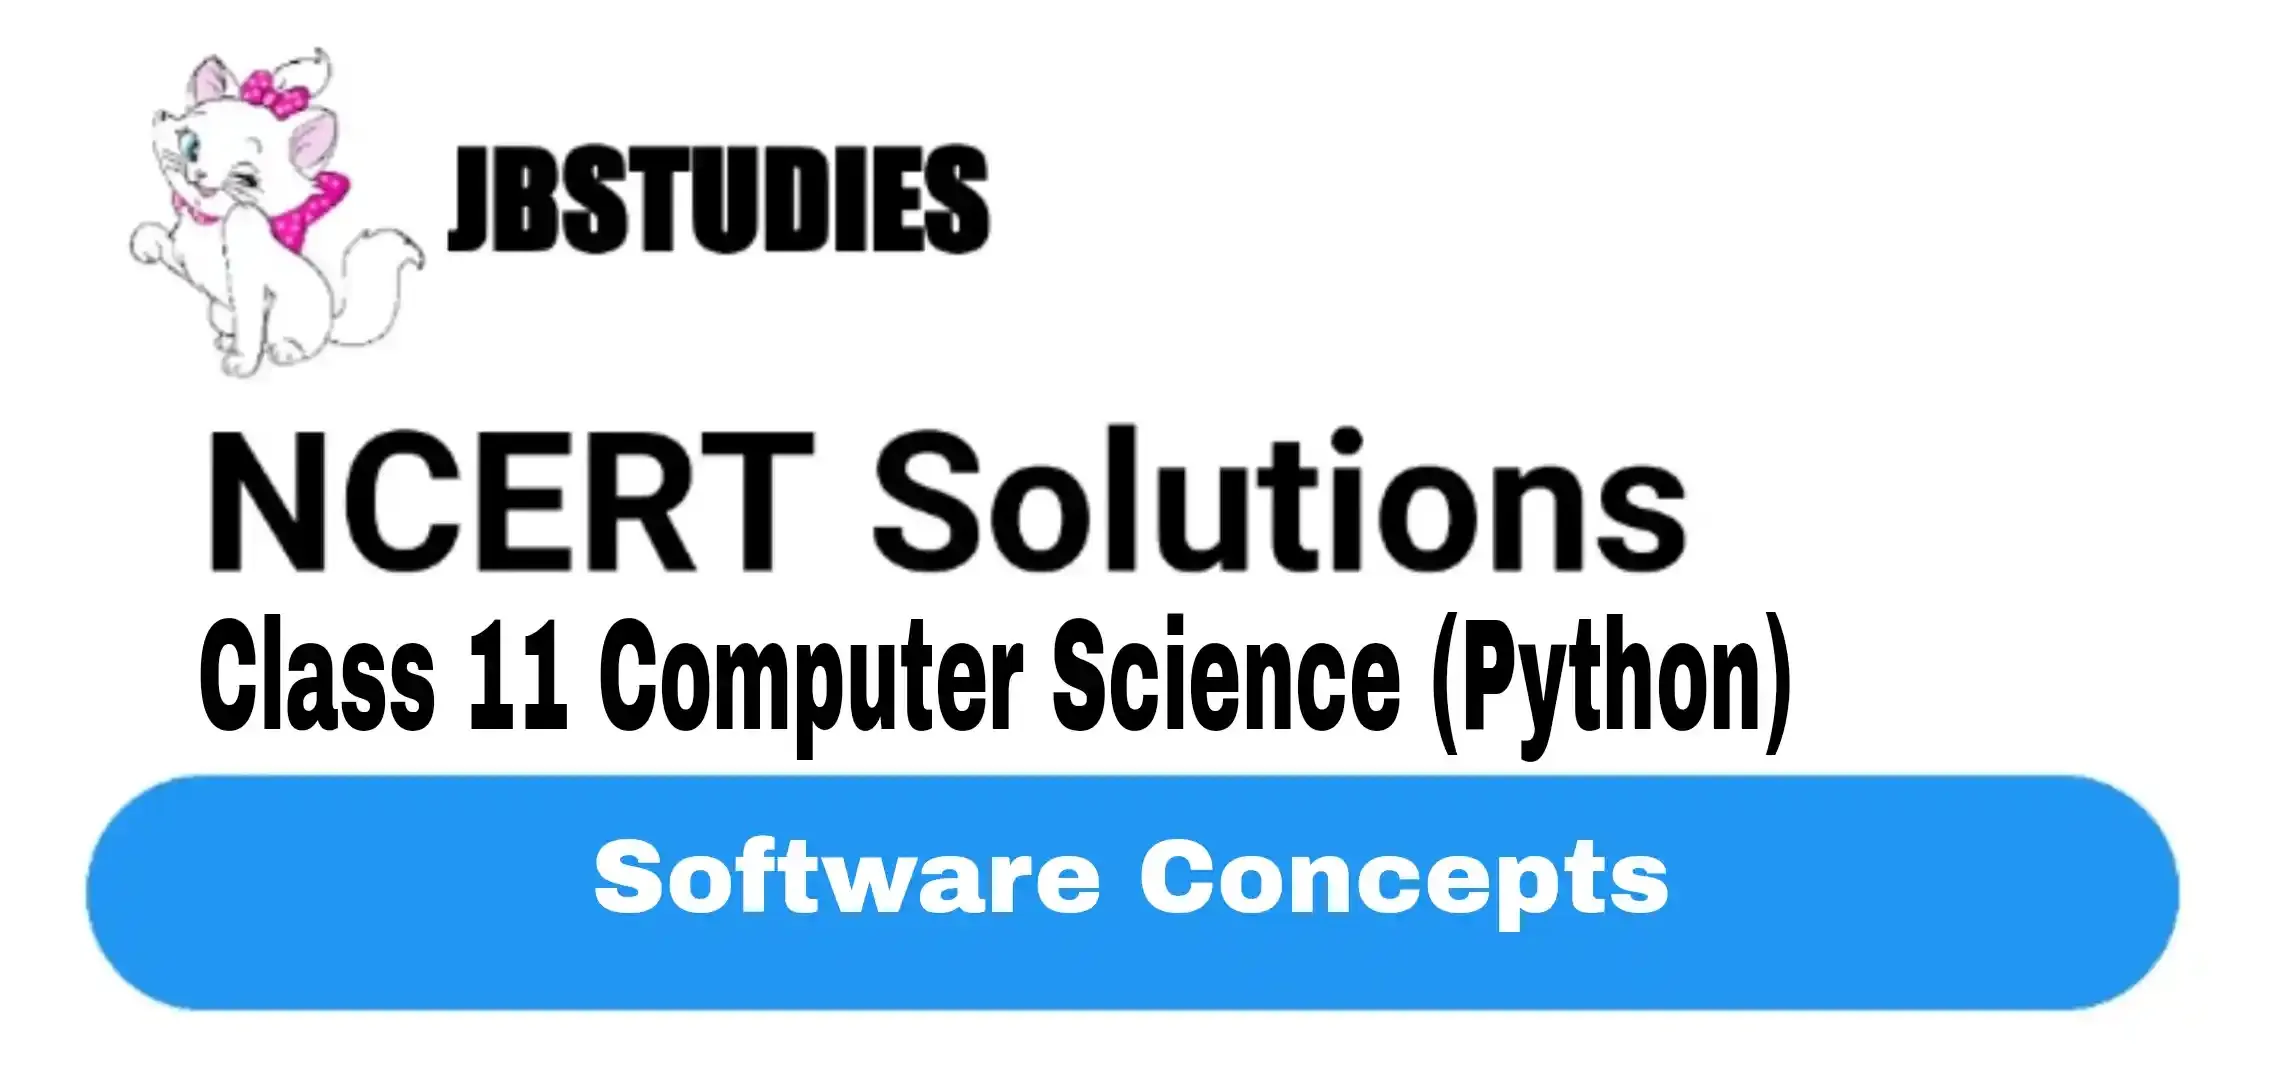 Solutions Class 11 Computer Science (Python) Chapter-2 (Software Concepts)